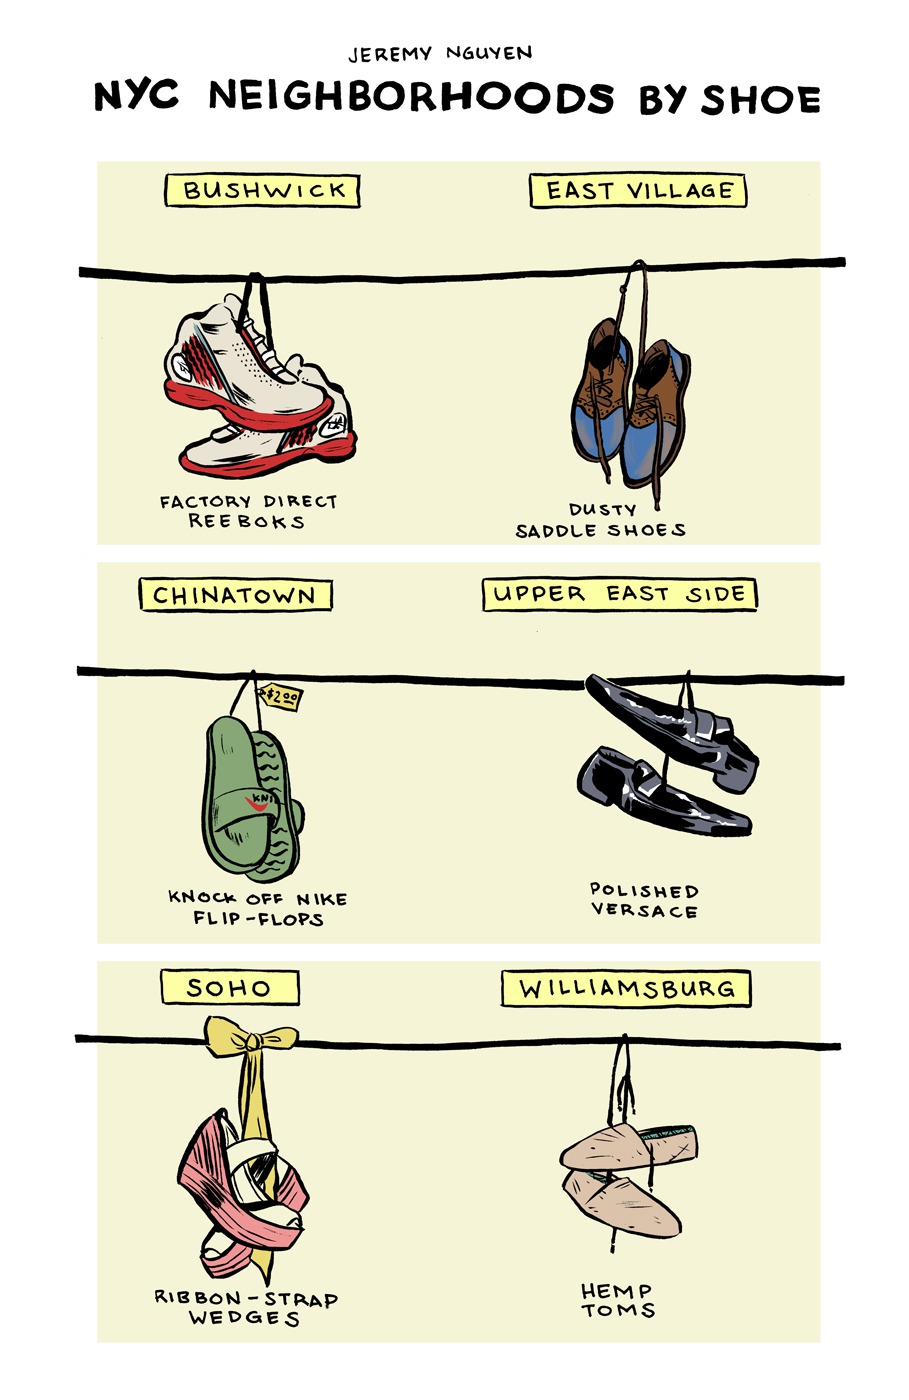 Know Your Neighborhood By Shoes